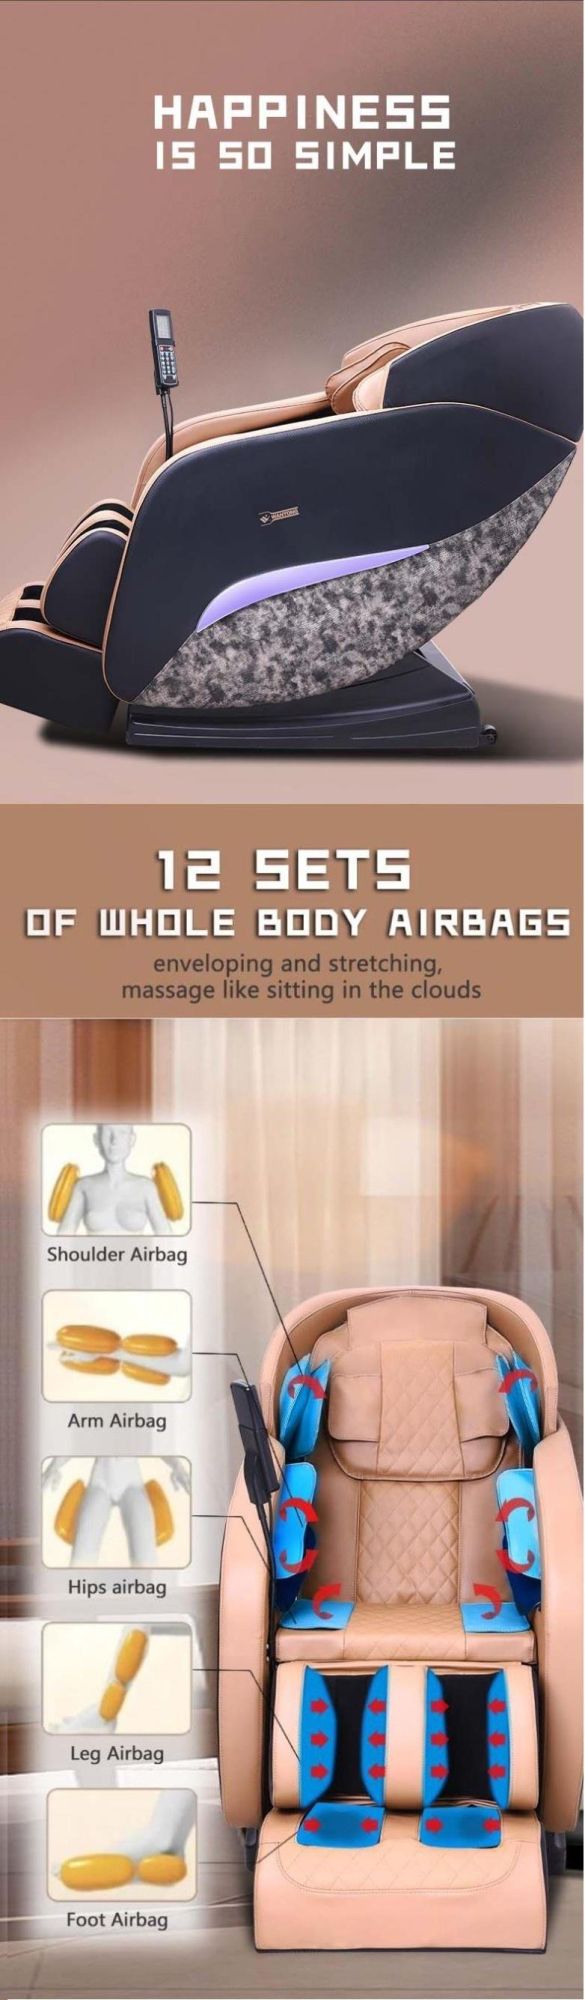 Electric Multifunction Heated Walking Rolling Massager Chair Cushion for Body Relaxation